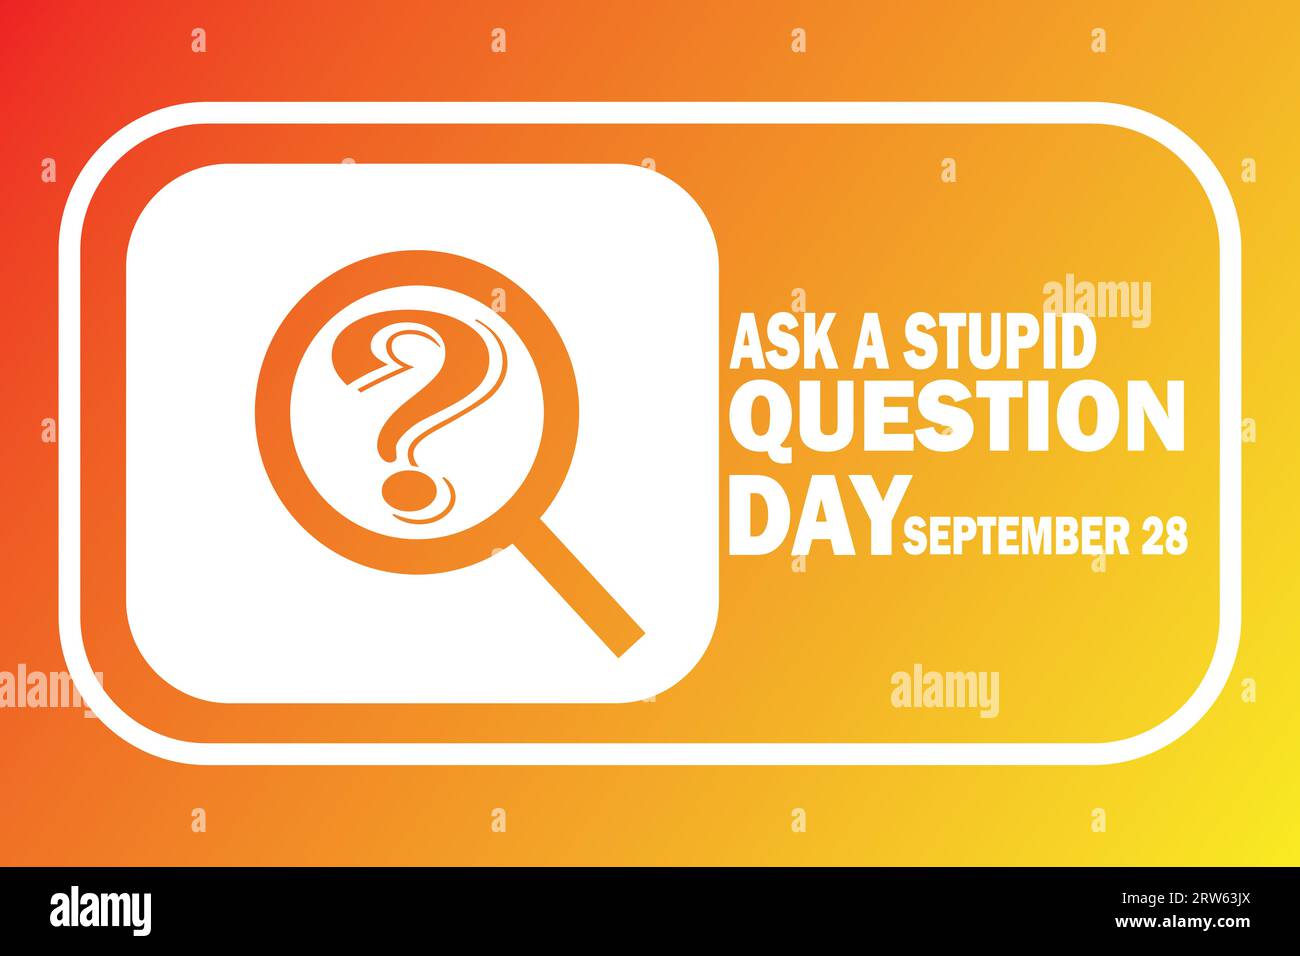 Ask A Stupid Question Day. September 28. Holiday concept. Template for background, banner, card, poster with text inscription. Vector illustration. Stock Vector